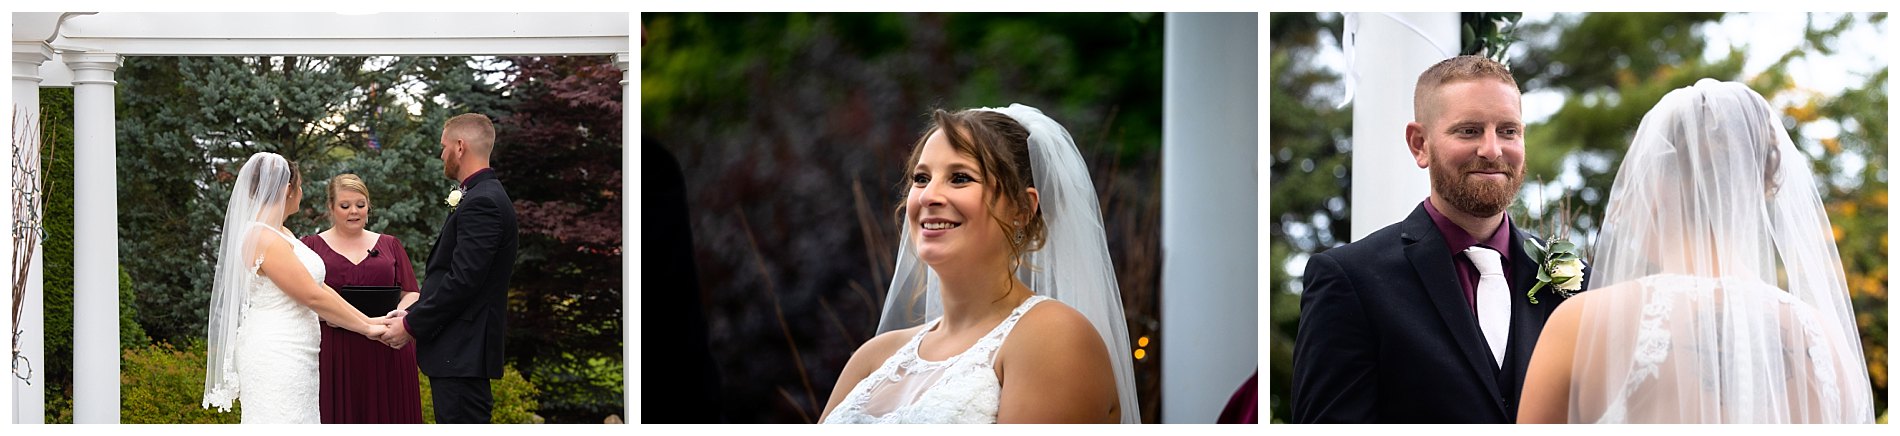 bride and groom faces during ceremony